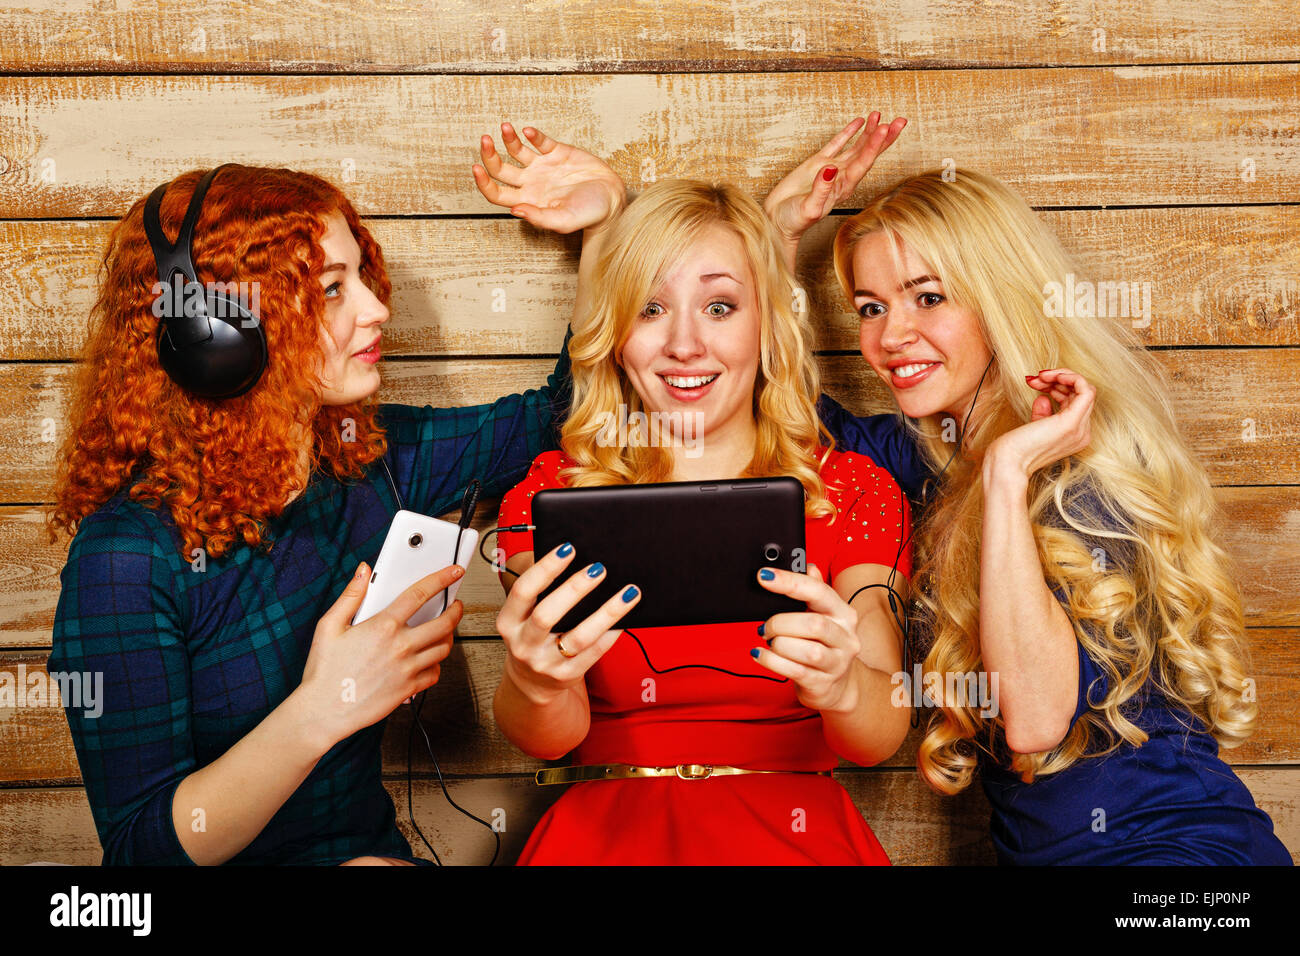 Three sisters, blond and red, listening to music on headphones. Girl doing funny ears hands sister, looking at screen Stock Photo